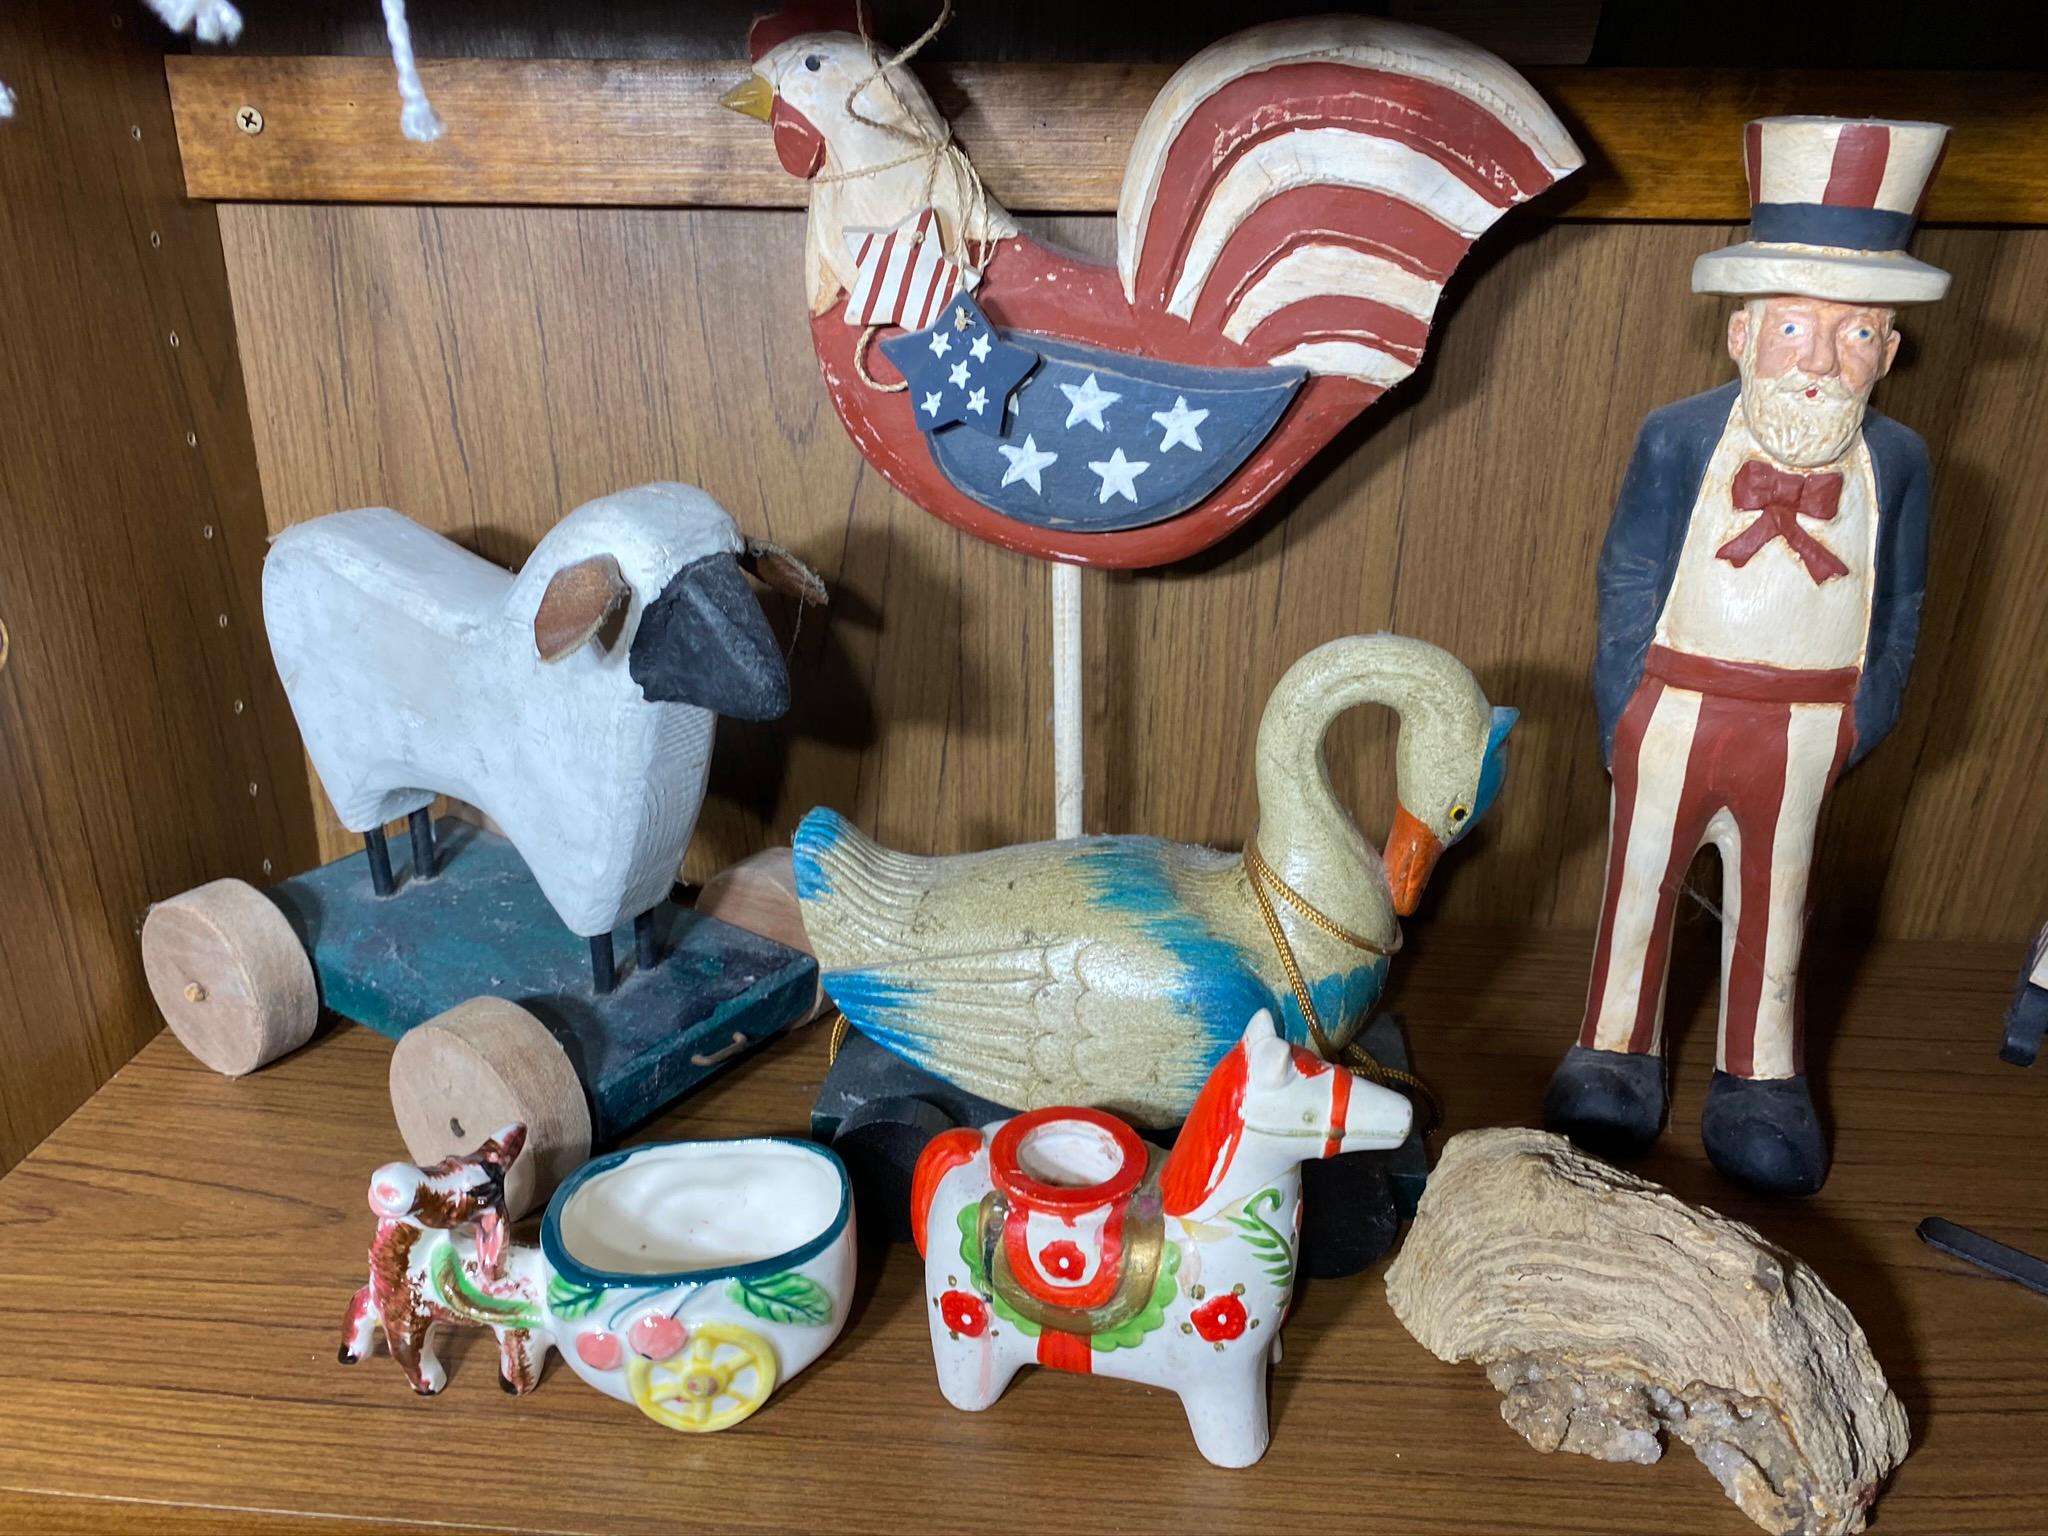 4 Shelves of Figurines, pottery and more